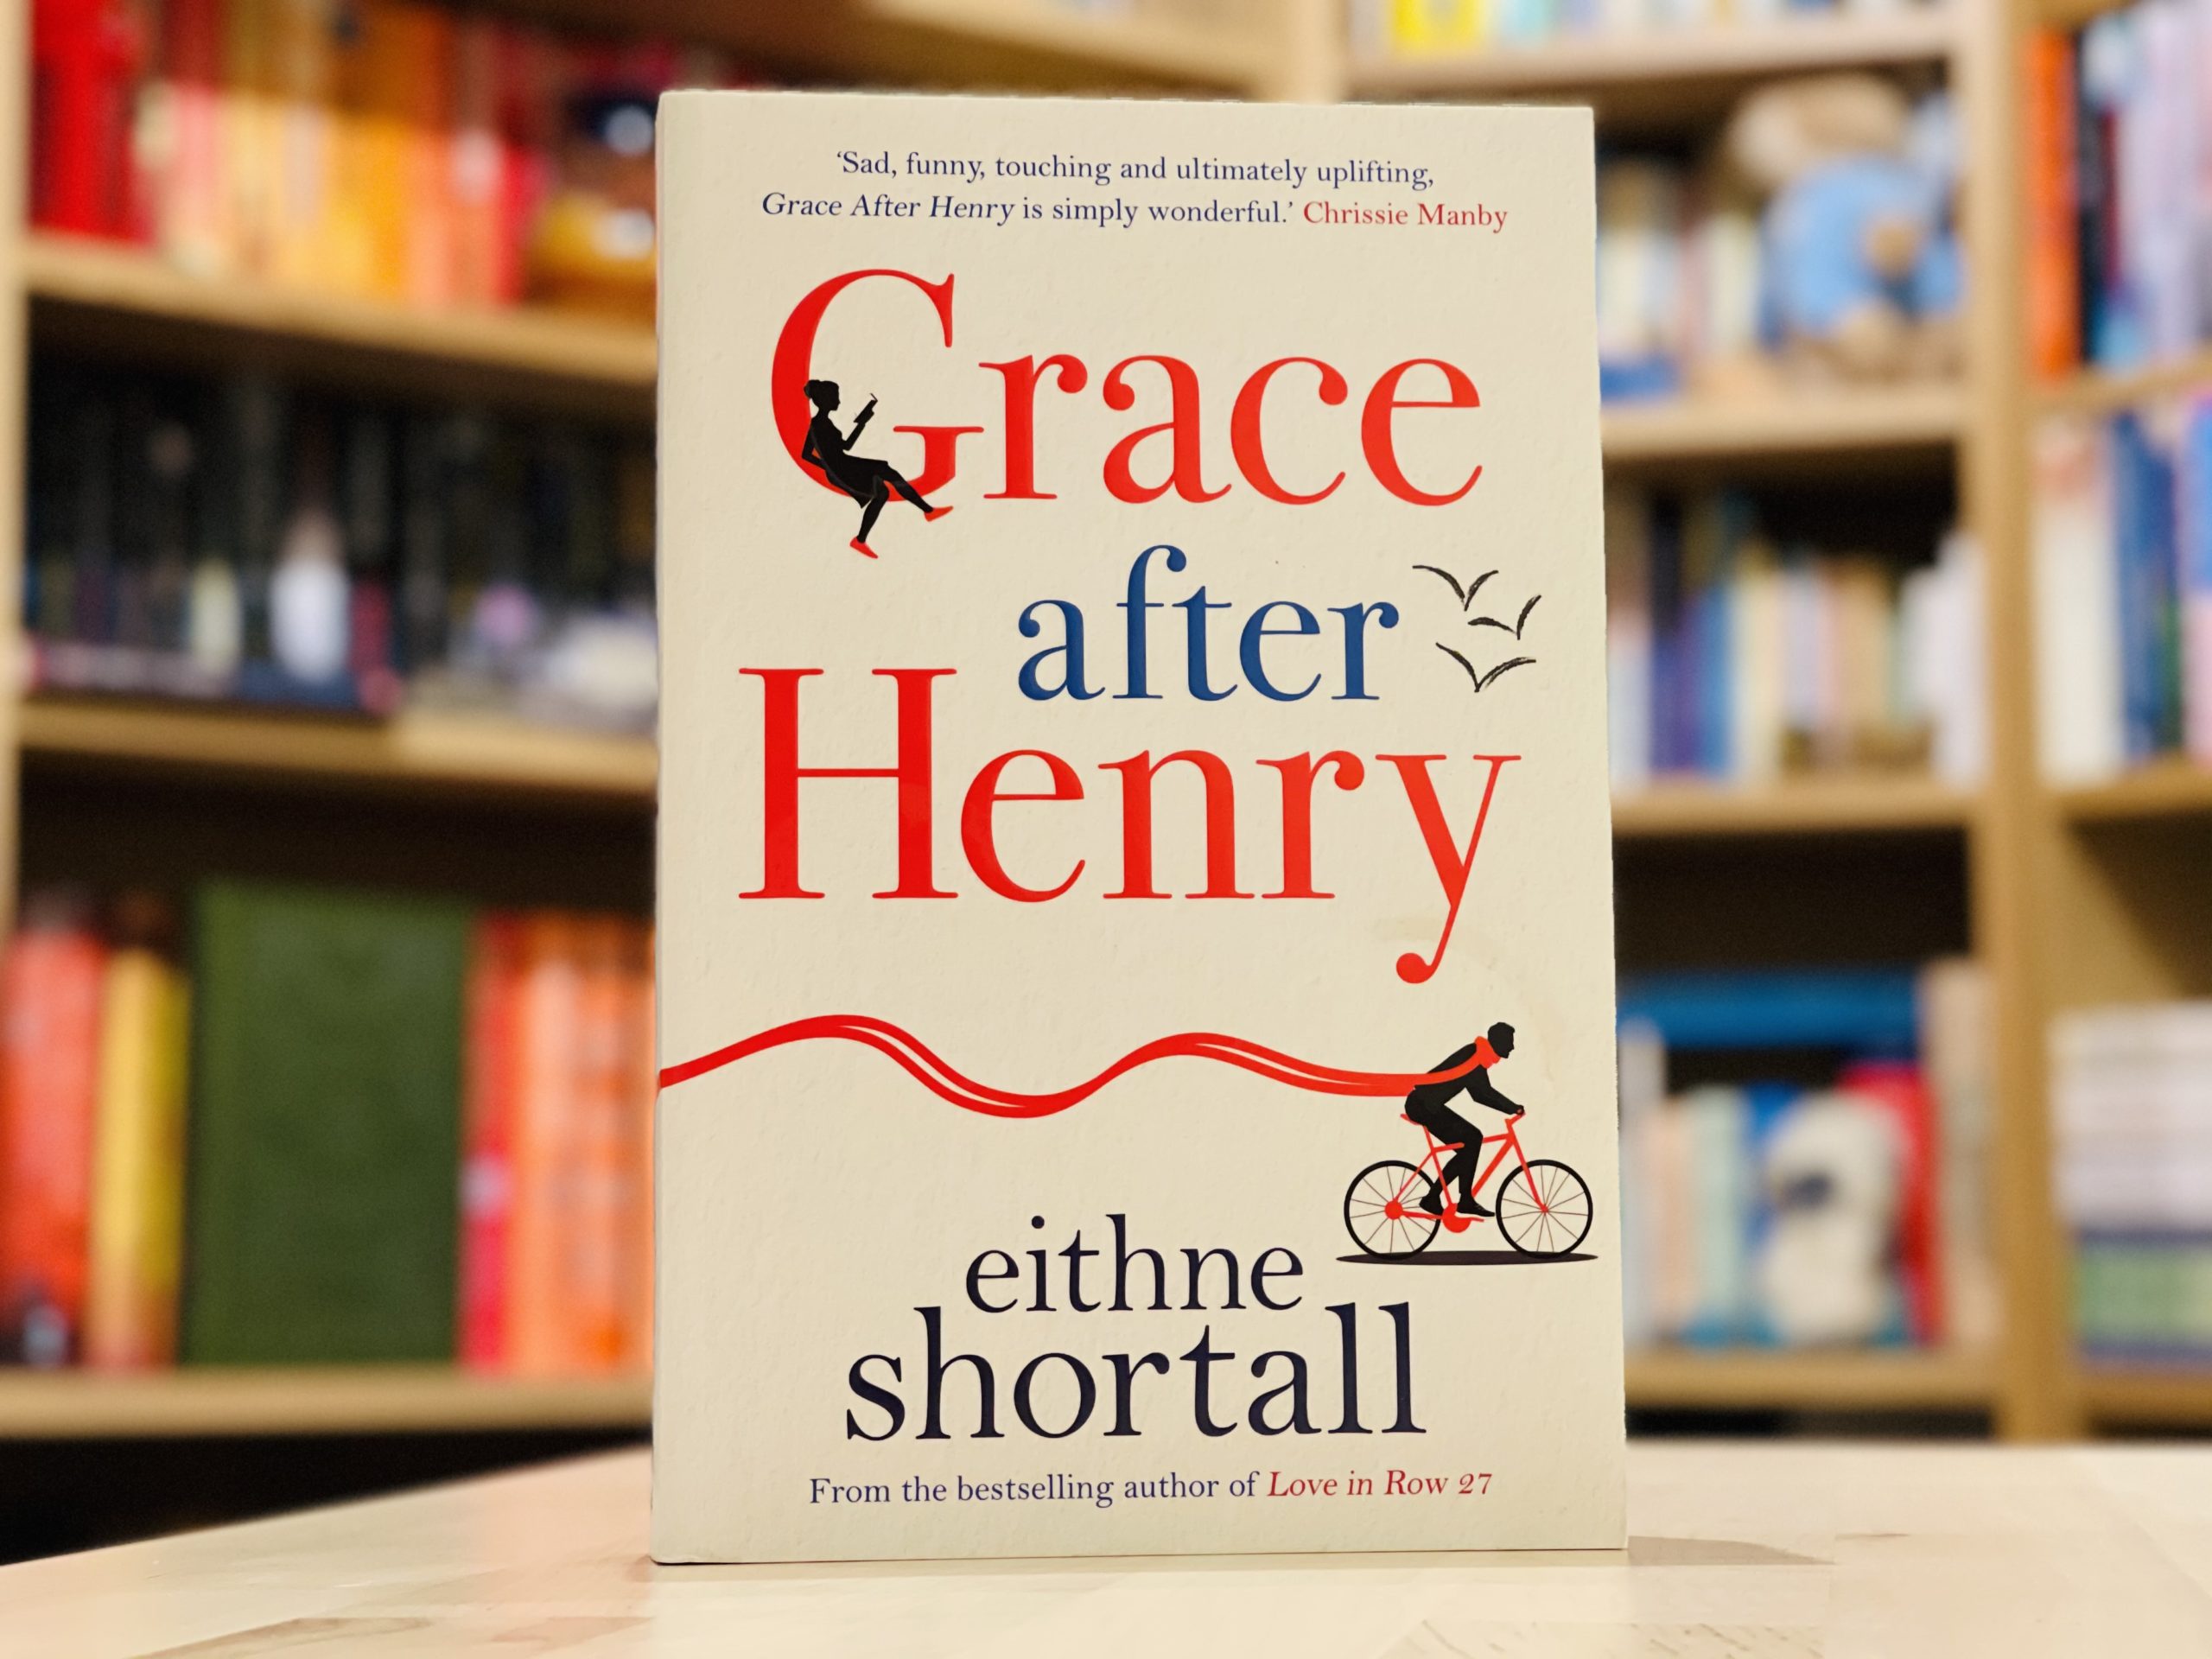 Grace After Henry by Eithne Shortall (2)